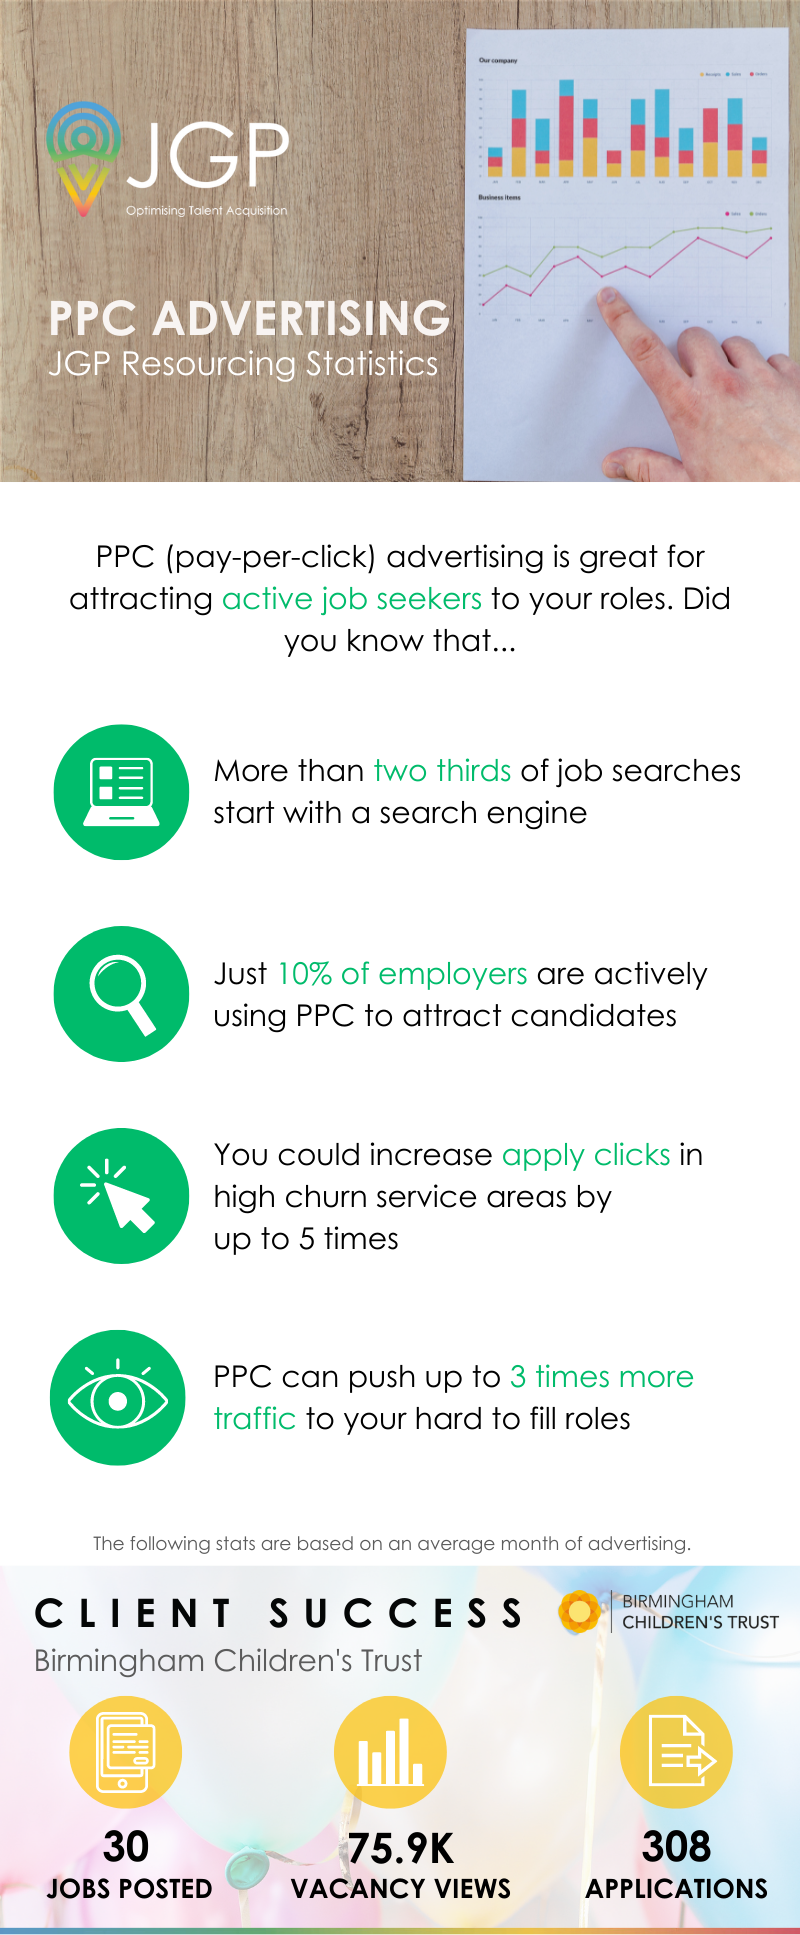 Infographic: pay per click advertising is great for attracting active job seekers to your roles. Did you know that: More than two thirds of job searches start with a search engine. Just 10% of employers are actively using PPC to attract candidates. You could increase apply clicks in high churn services areas by up to 5 times. PPC can push up to 3 times more traffic to your hard to fill roles. 